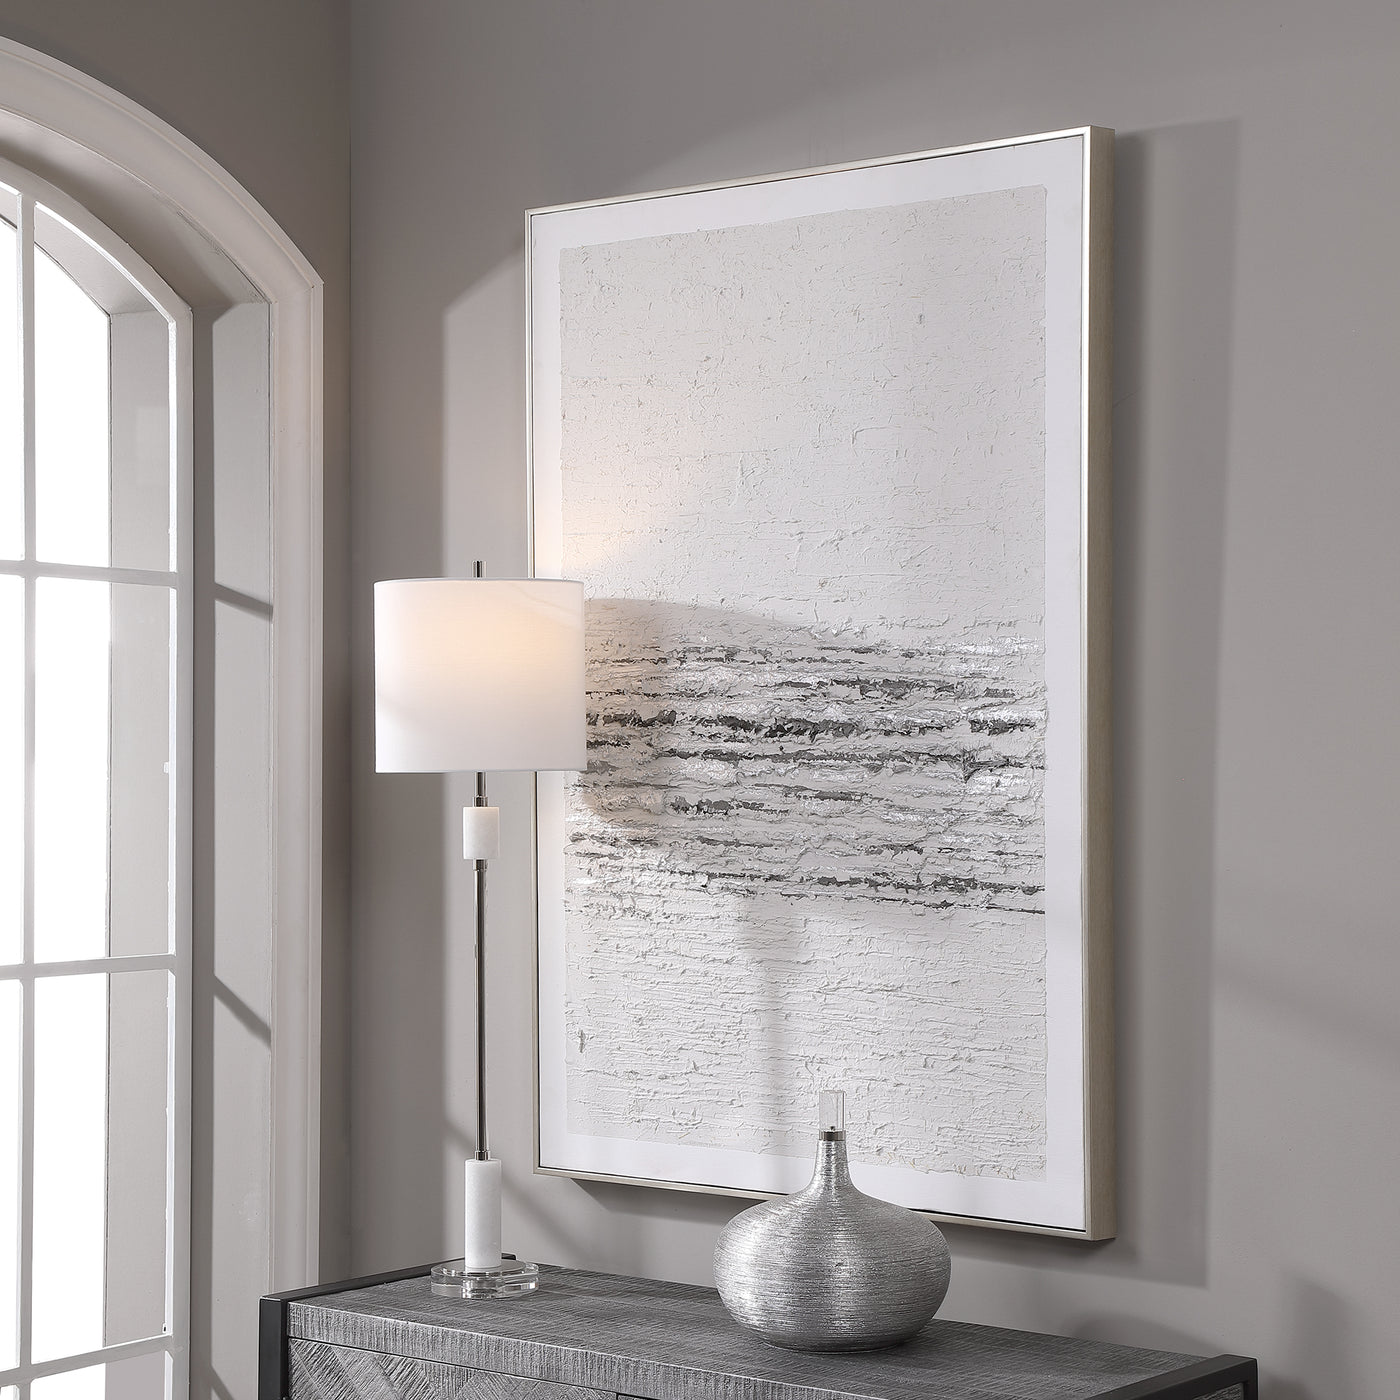 Stylish And Sophisticated, This Hand Painting Has Noticeable Textural Accents With Light Gray, Charcoal And Silver Leaf To...